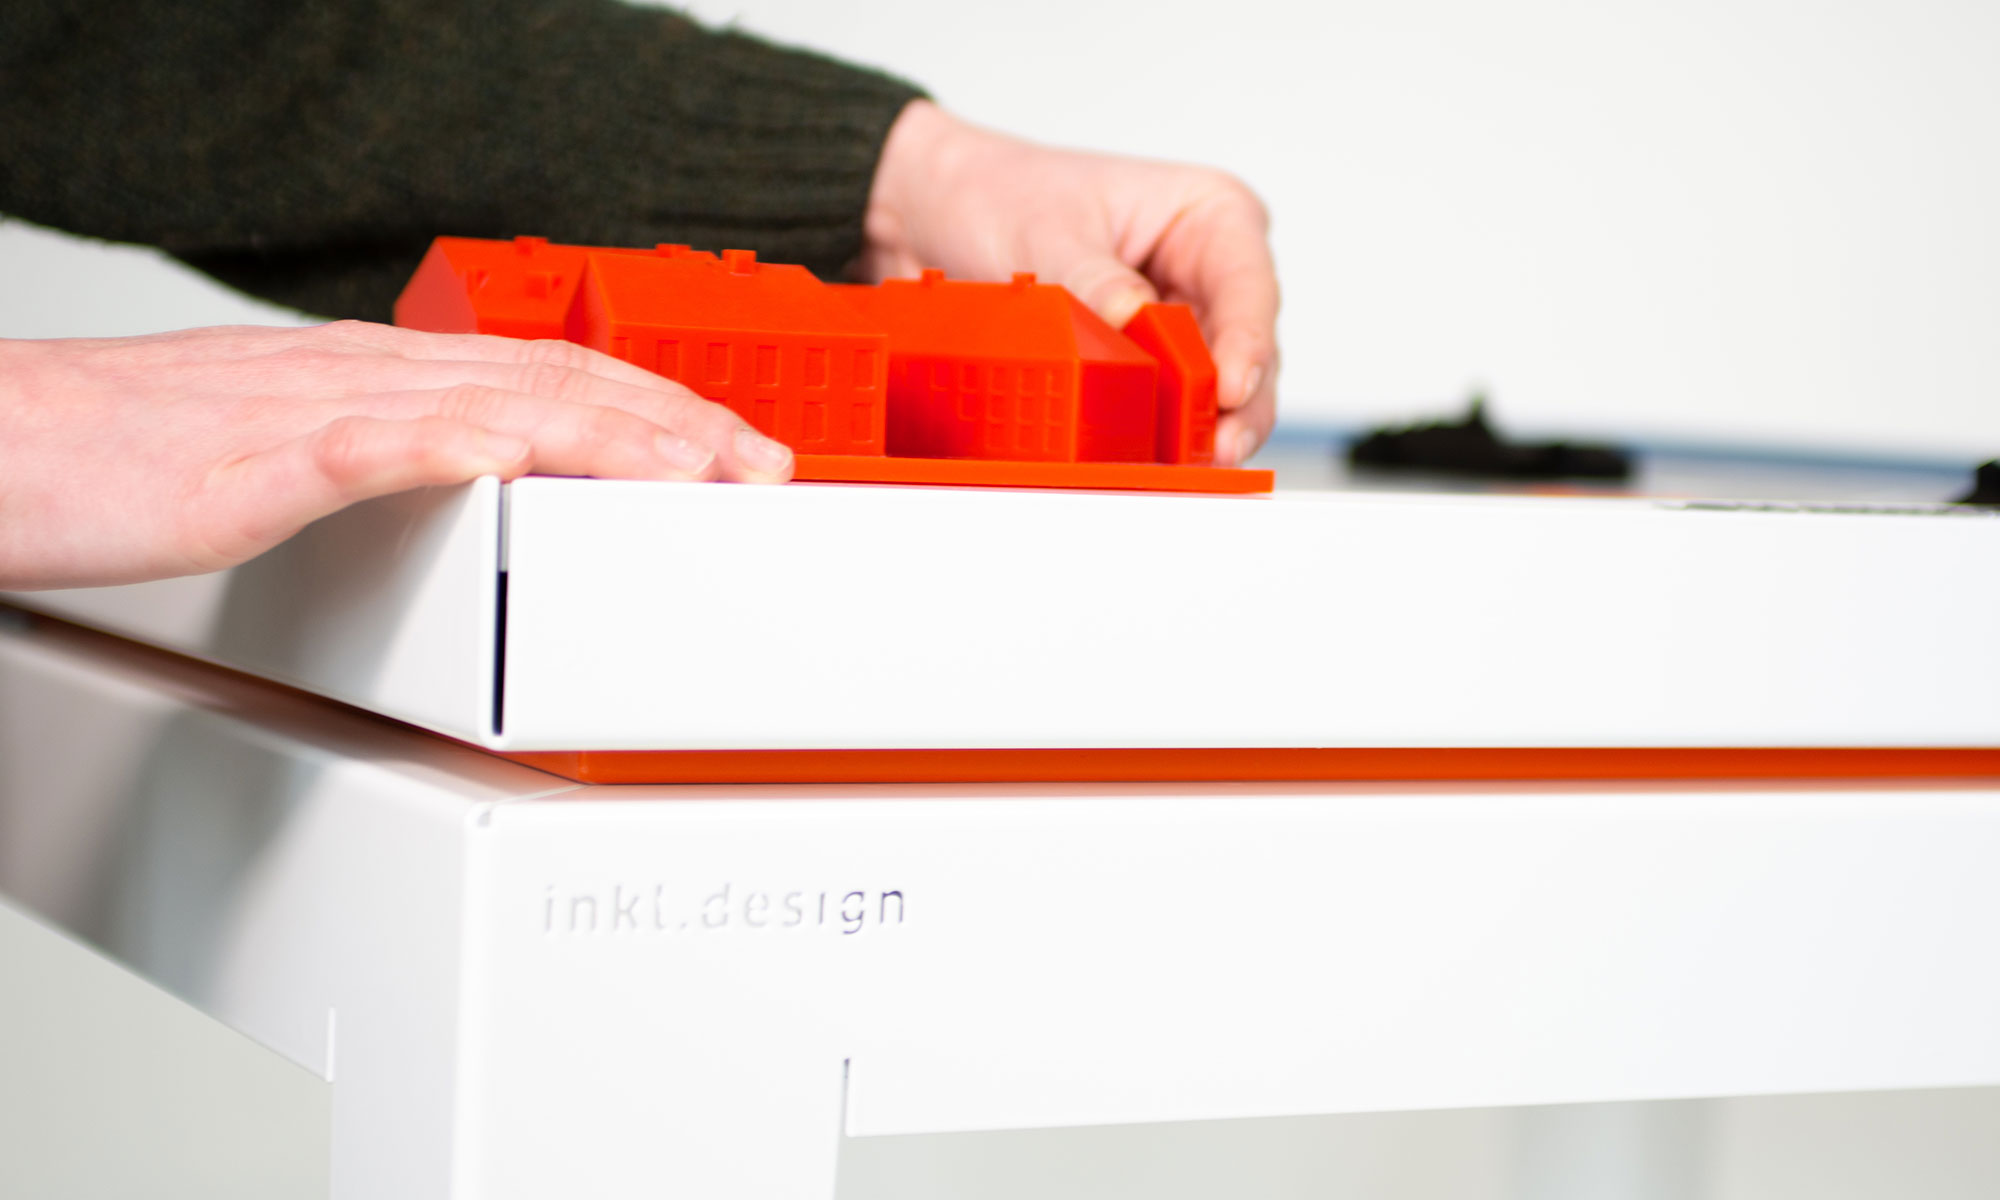 A close-up shows two hands touching the corner of the model where a three-dimensional detail of the building can be found. The base is clearly recognisable: a white metal table with the engraving "inkl. design", on top of which is a likewise white metal tray that supports the model. Between the two is an orange board.